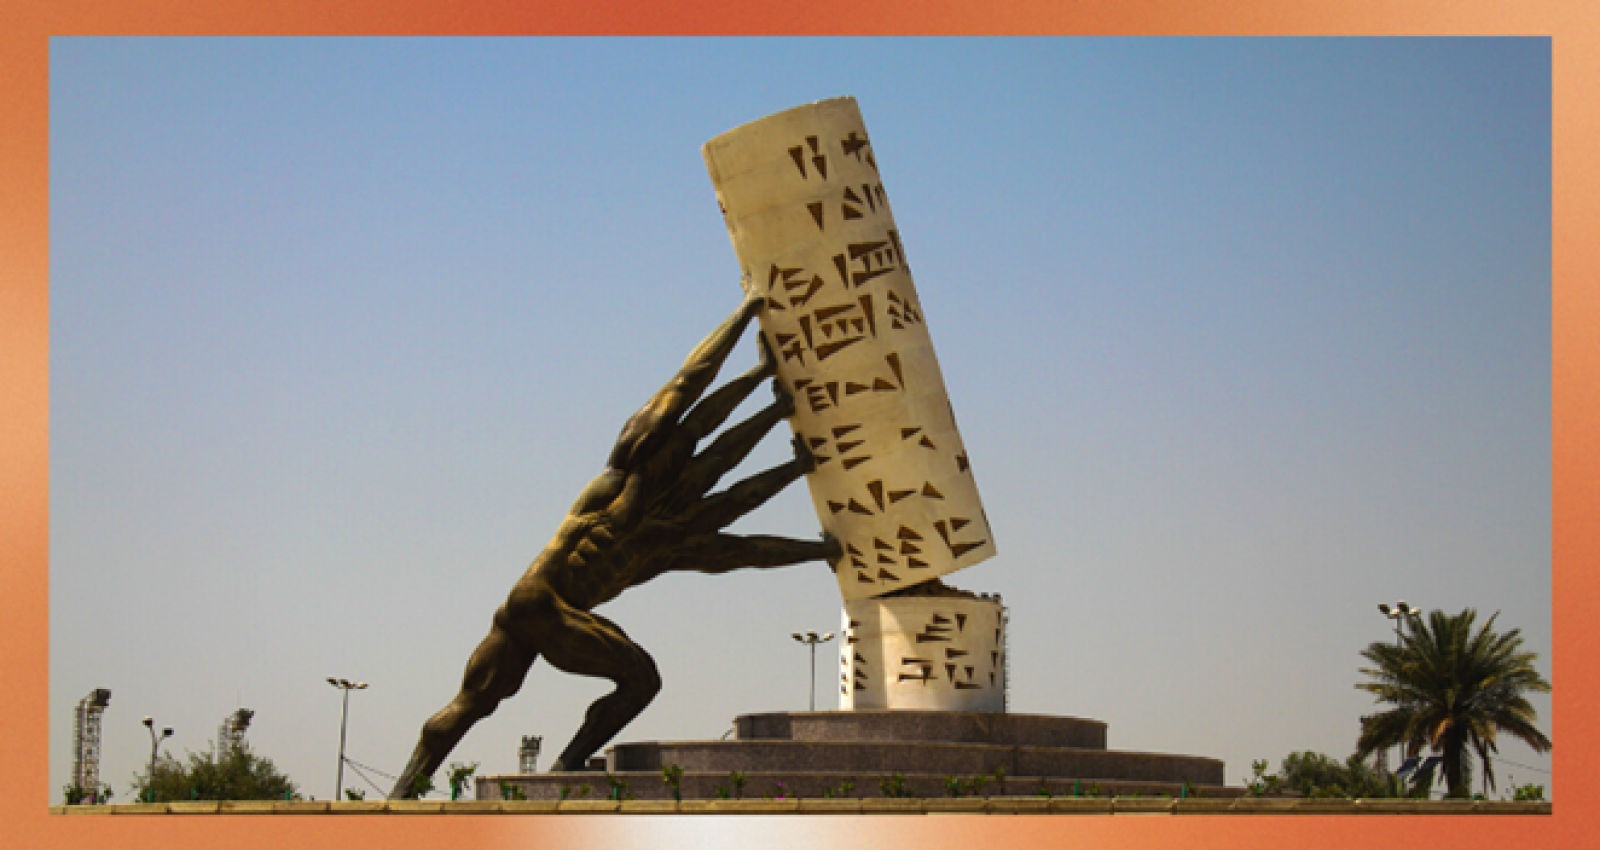 A monument of a broken cylinder being held up by a statue with five arms. The “Saving Iraqi Culture” monument in Baghdad designed by sculptor Mohammed Ghani Hikmat. Iraq is one of top five DPF recipients in FCV settings. Credit: Rasool Ali/Shutterstock